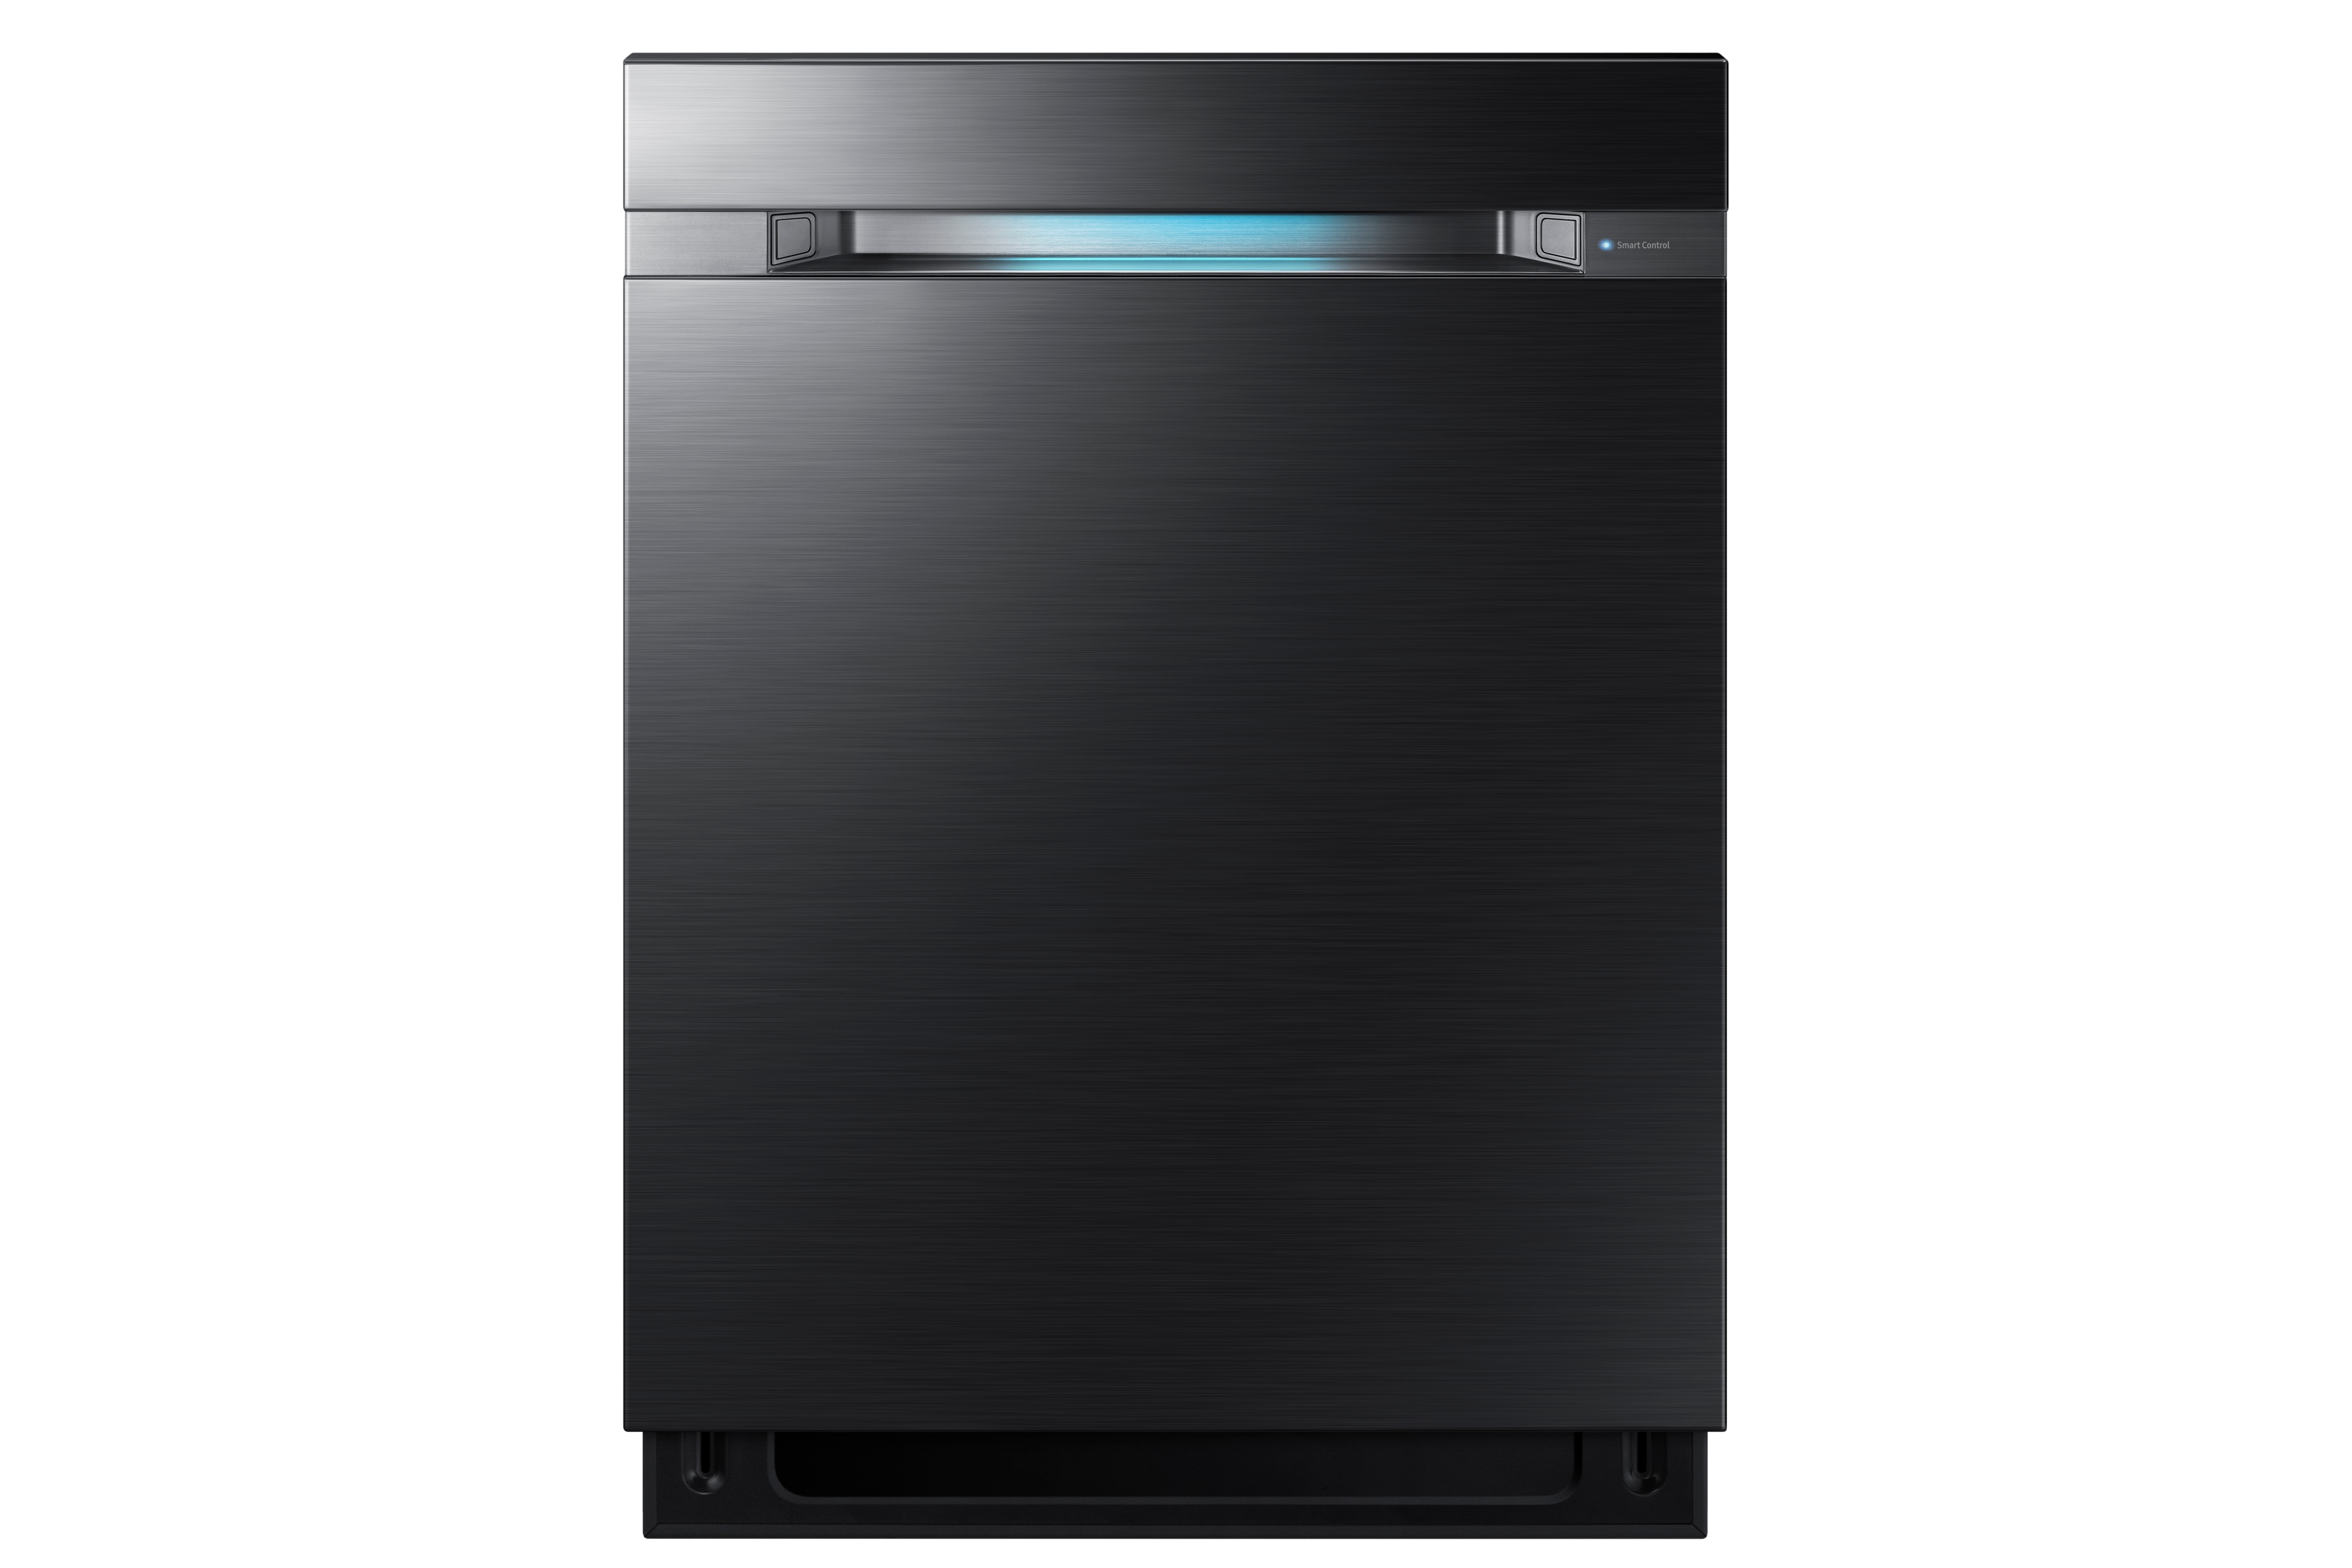 https://image-us.samsung.com/SamsungUS/home/home-appliances/dishwashers/waterwall/pd/dw80m9960ug/gallery/1_DW80M9960UG_001_Front_Black__011017.jpg?$related-products-jpg$